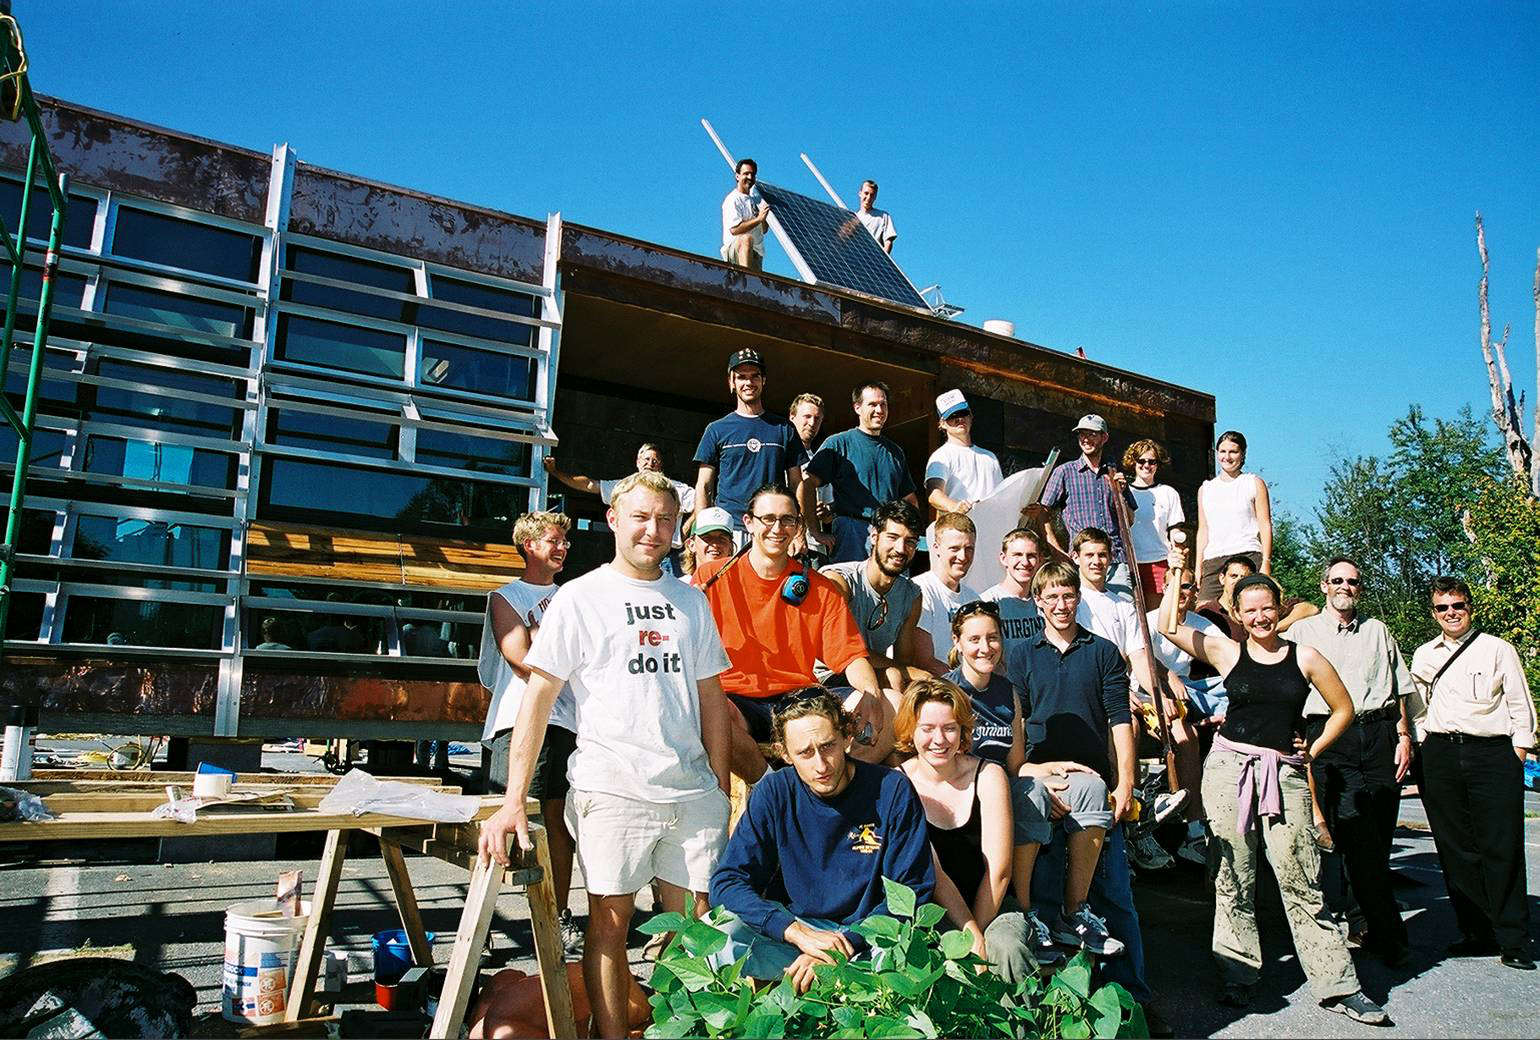 Group photo of students standing at a building while solar panels are being installed